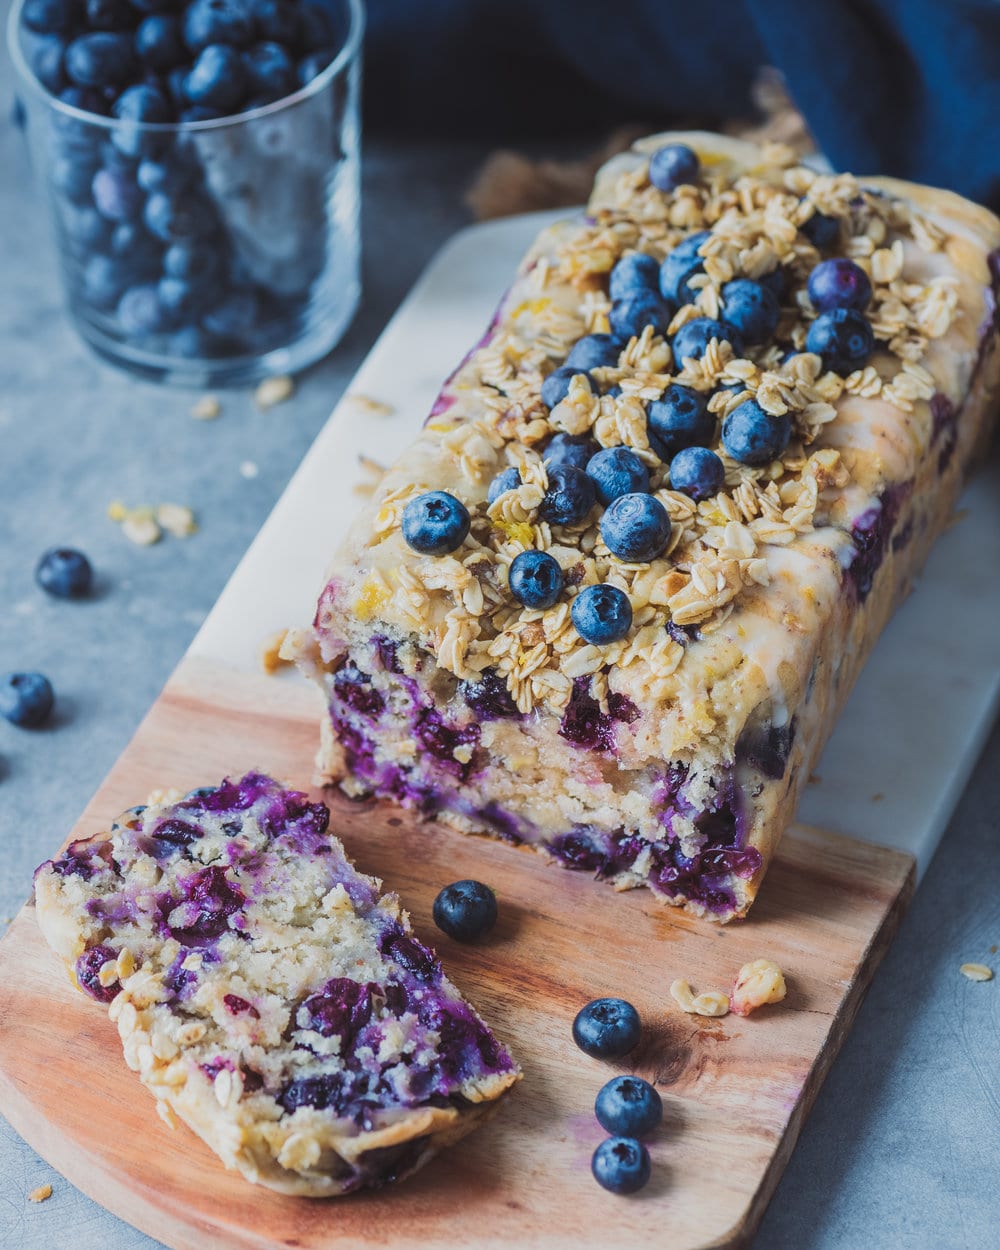 Blueberry Banana Bread with Streusel Topping